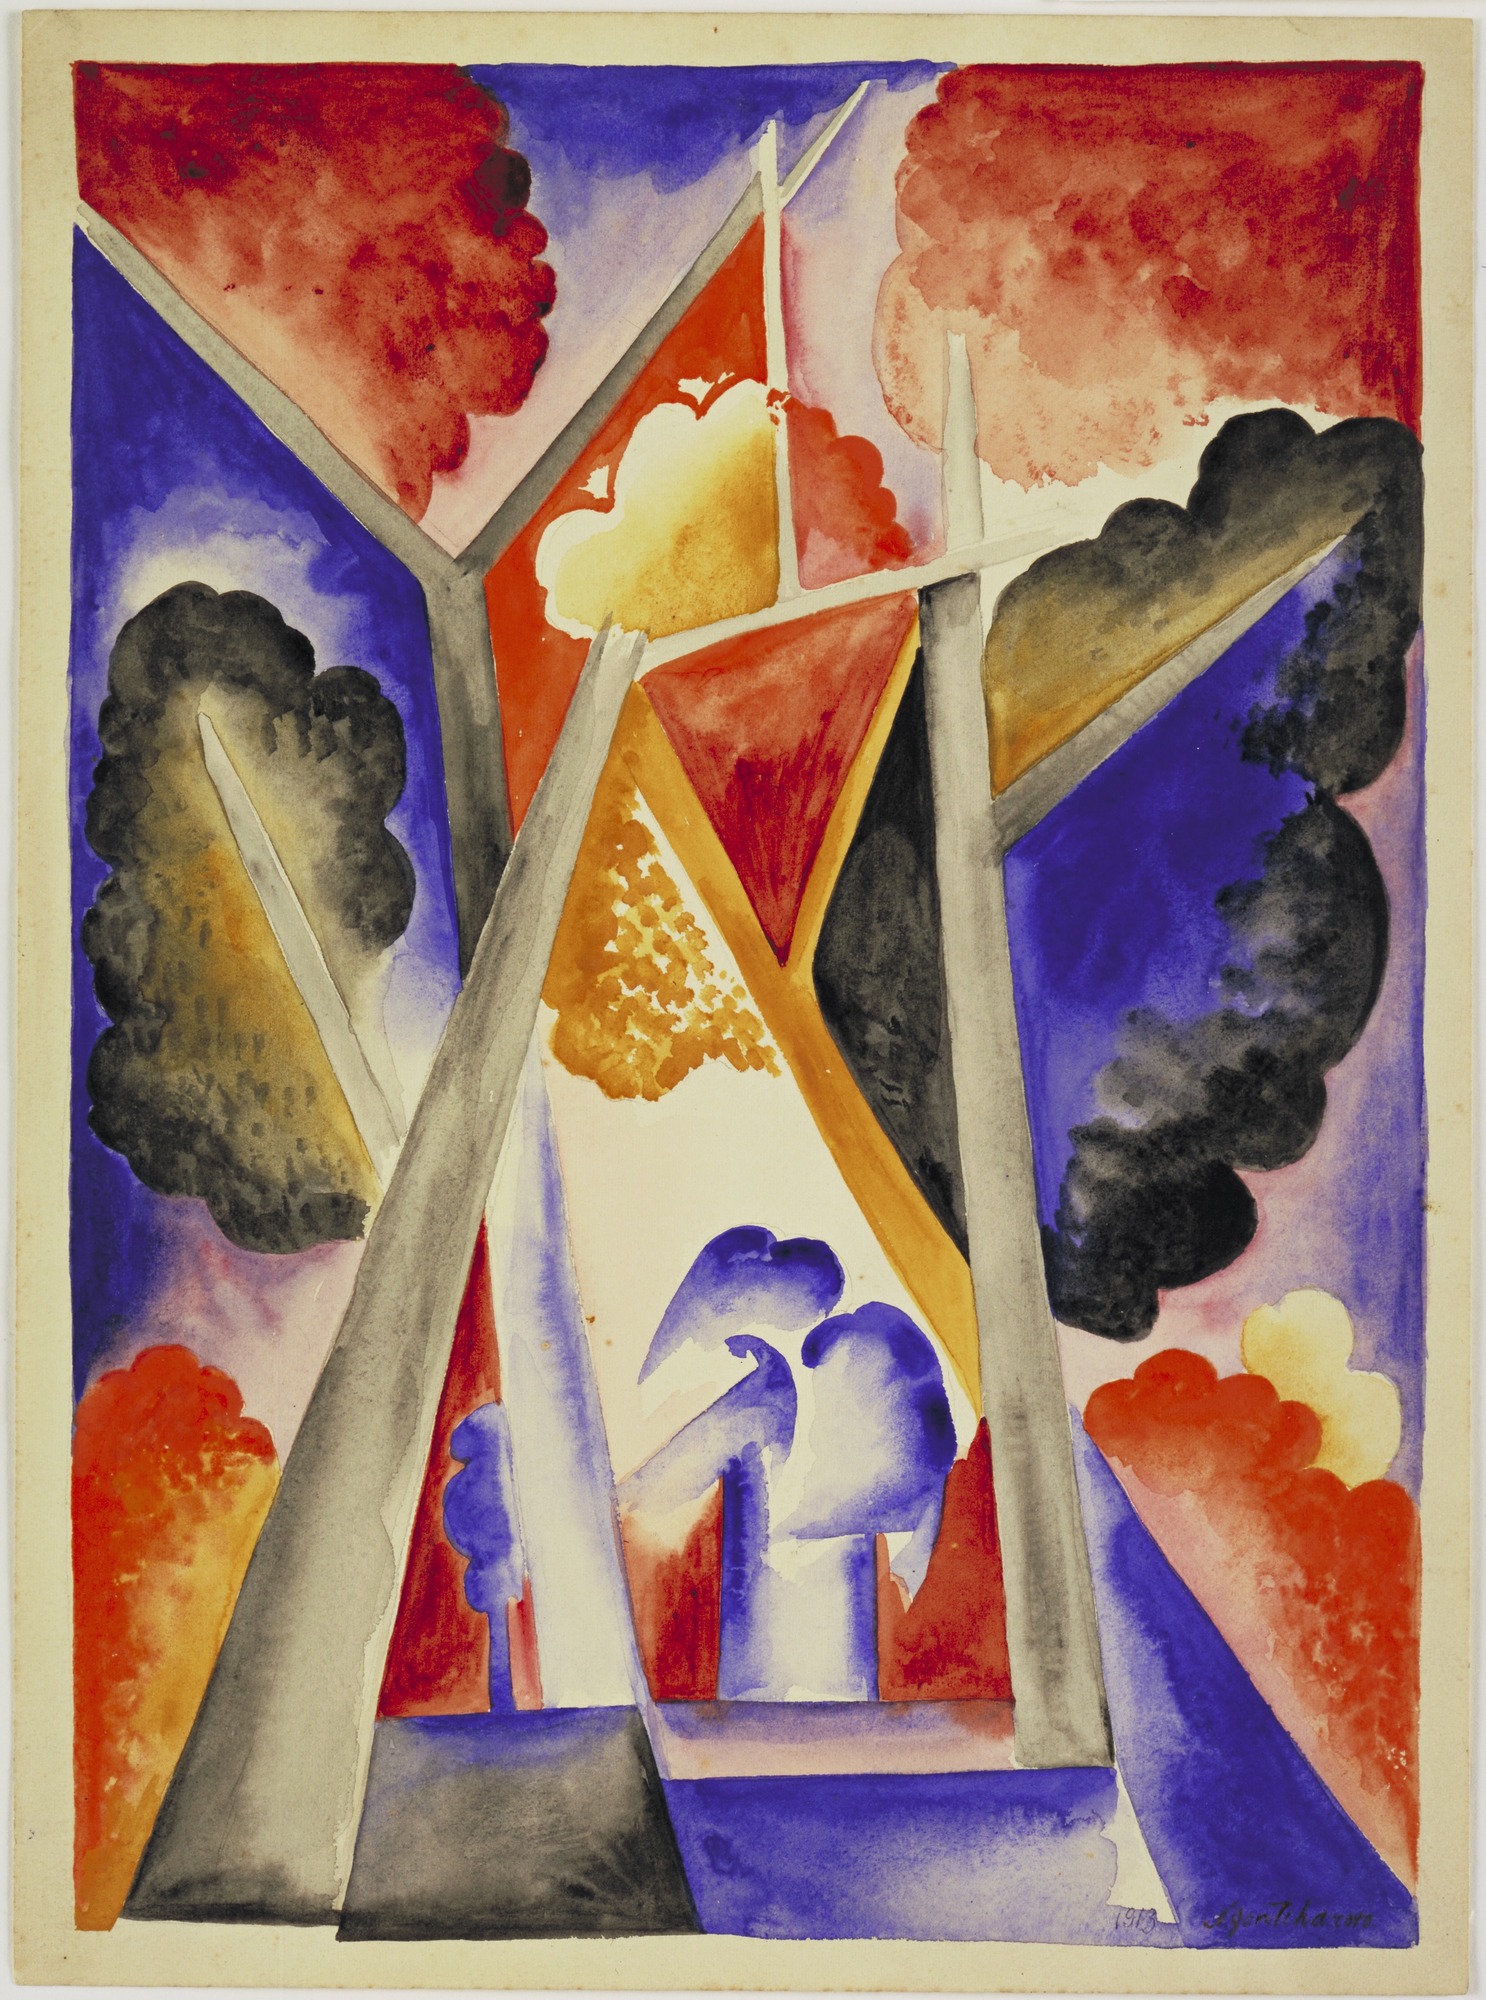 Natalia Goncharova, The Forest, 1913 at arthistoryproject.com and https://www.moma.org/collection/works/38285